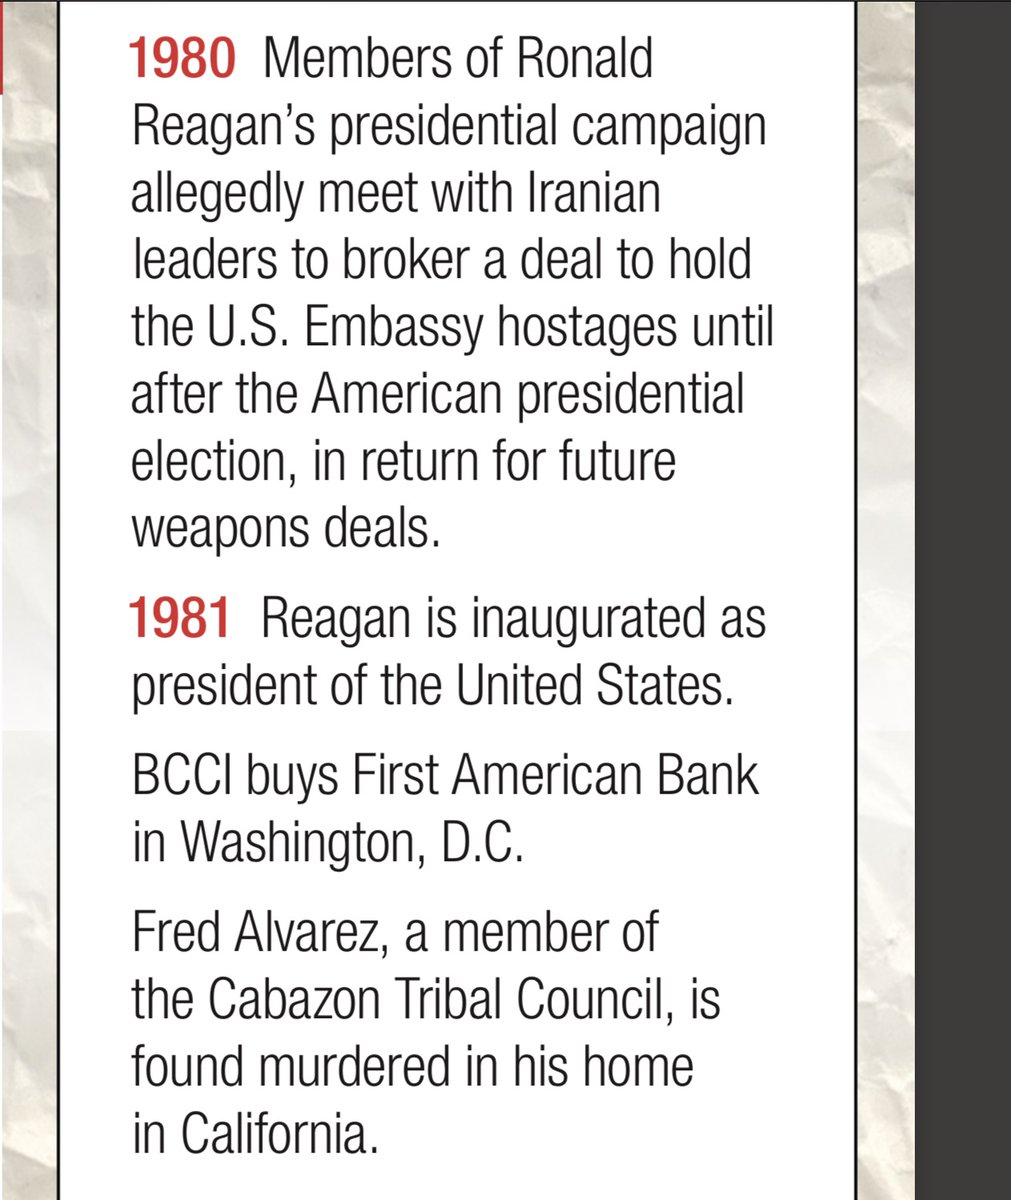 *October Surprise1980Members ofRonald Reagan’spresidential campaignmeet w Iranian leaders2 broker deal 2 hold U.S. Embassy hostages until after American presidential election,in return 4 future weapons deals.Quid Pro QuoPROMIS